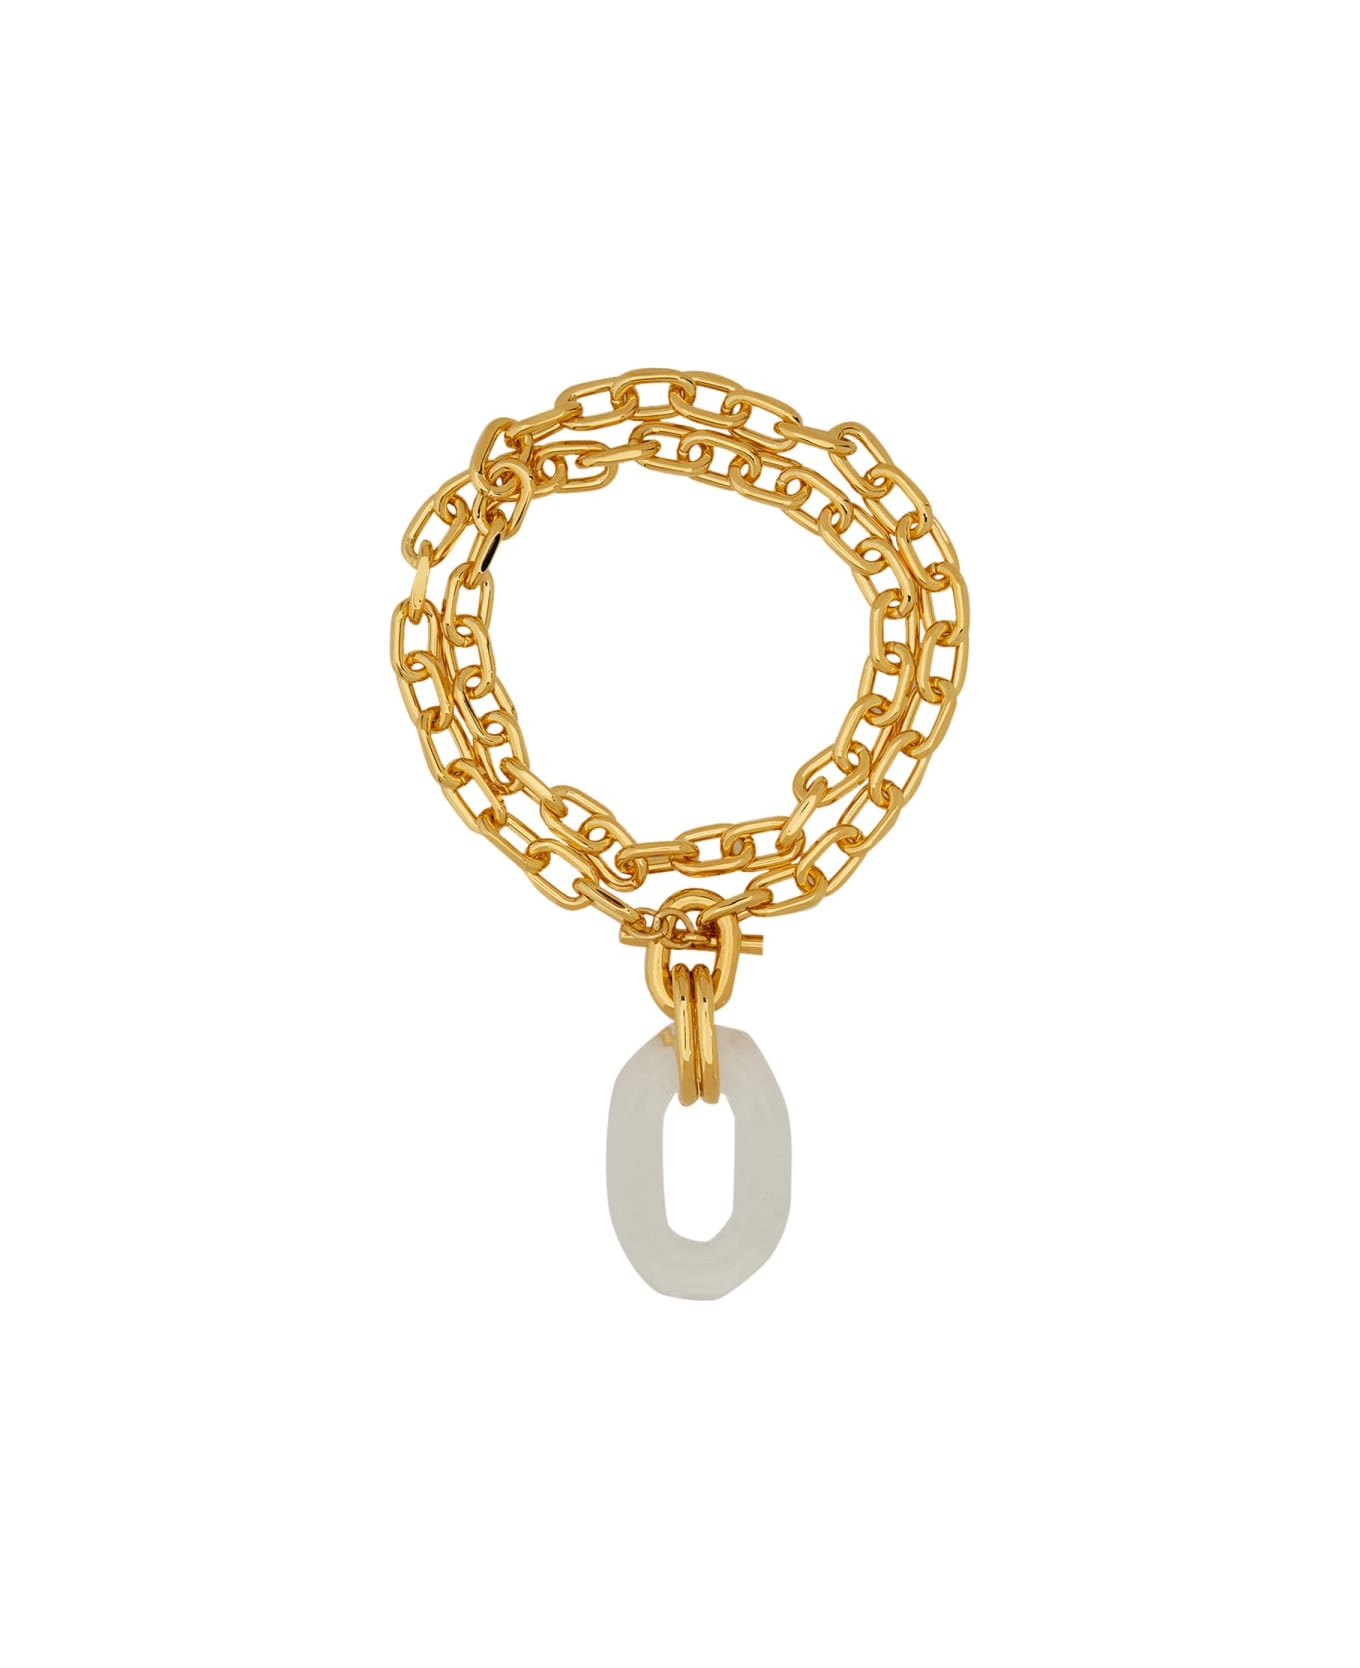 Paco Rabanne Necklace With Chain - GOLD